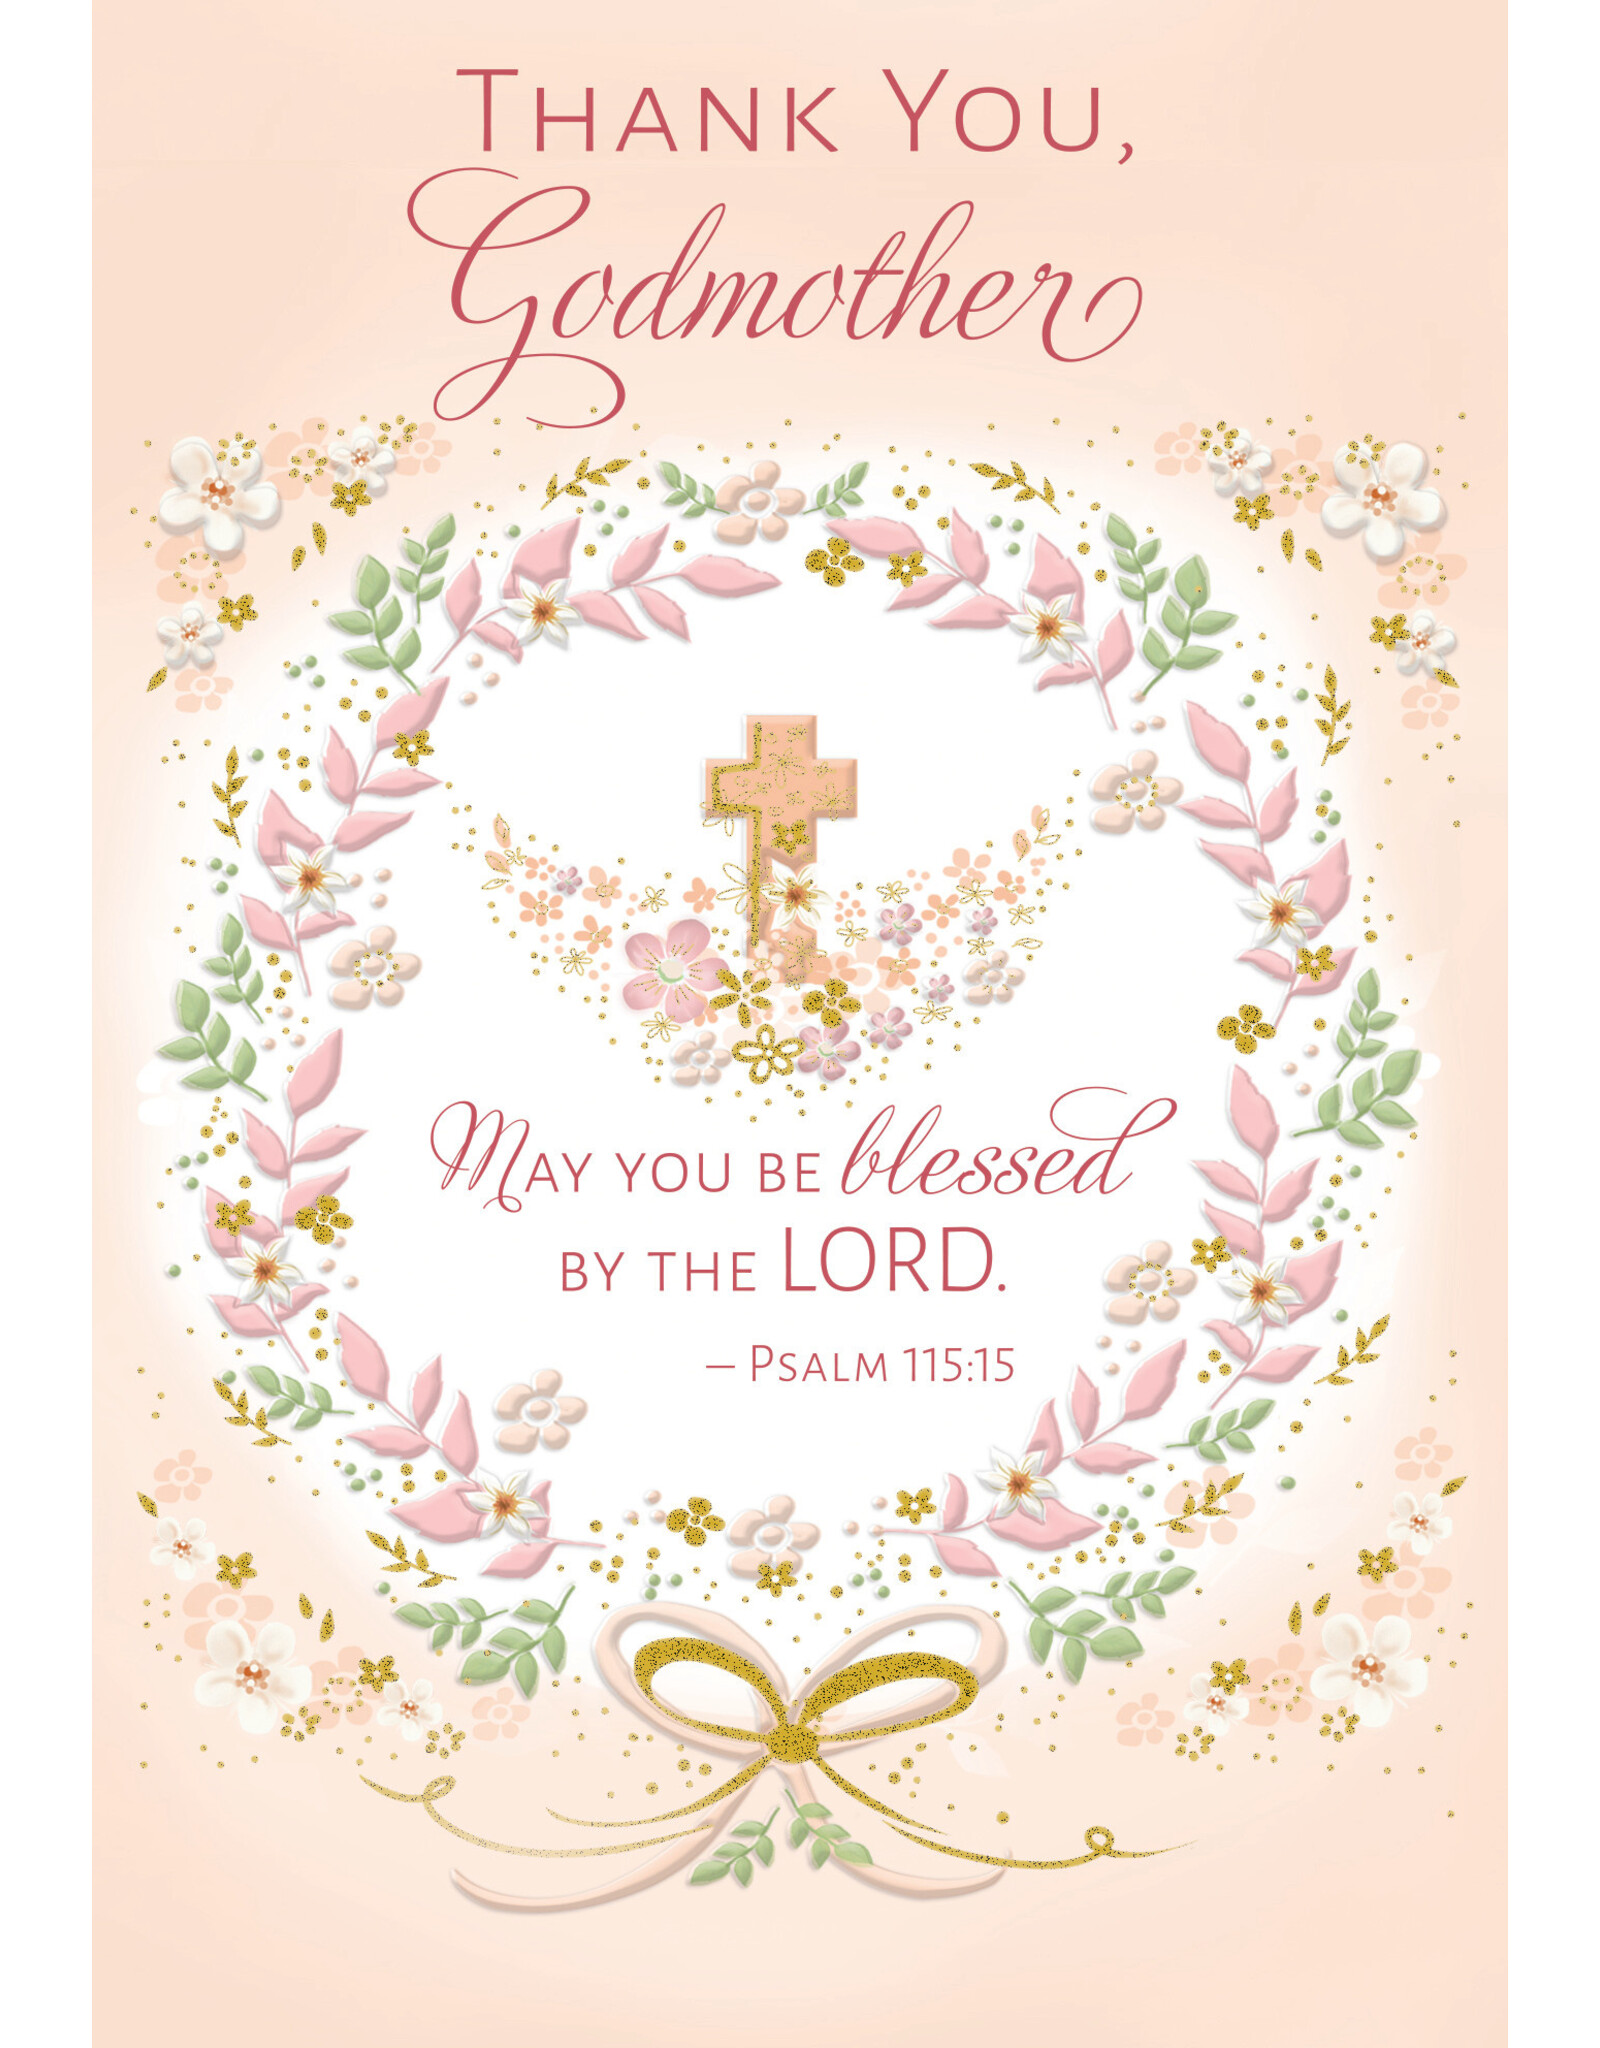 Greetings of Faith Card - Thank You Godmother (Baptism)